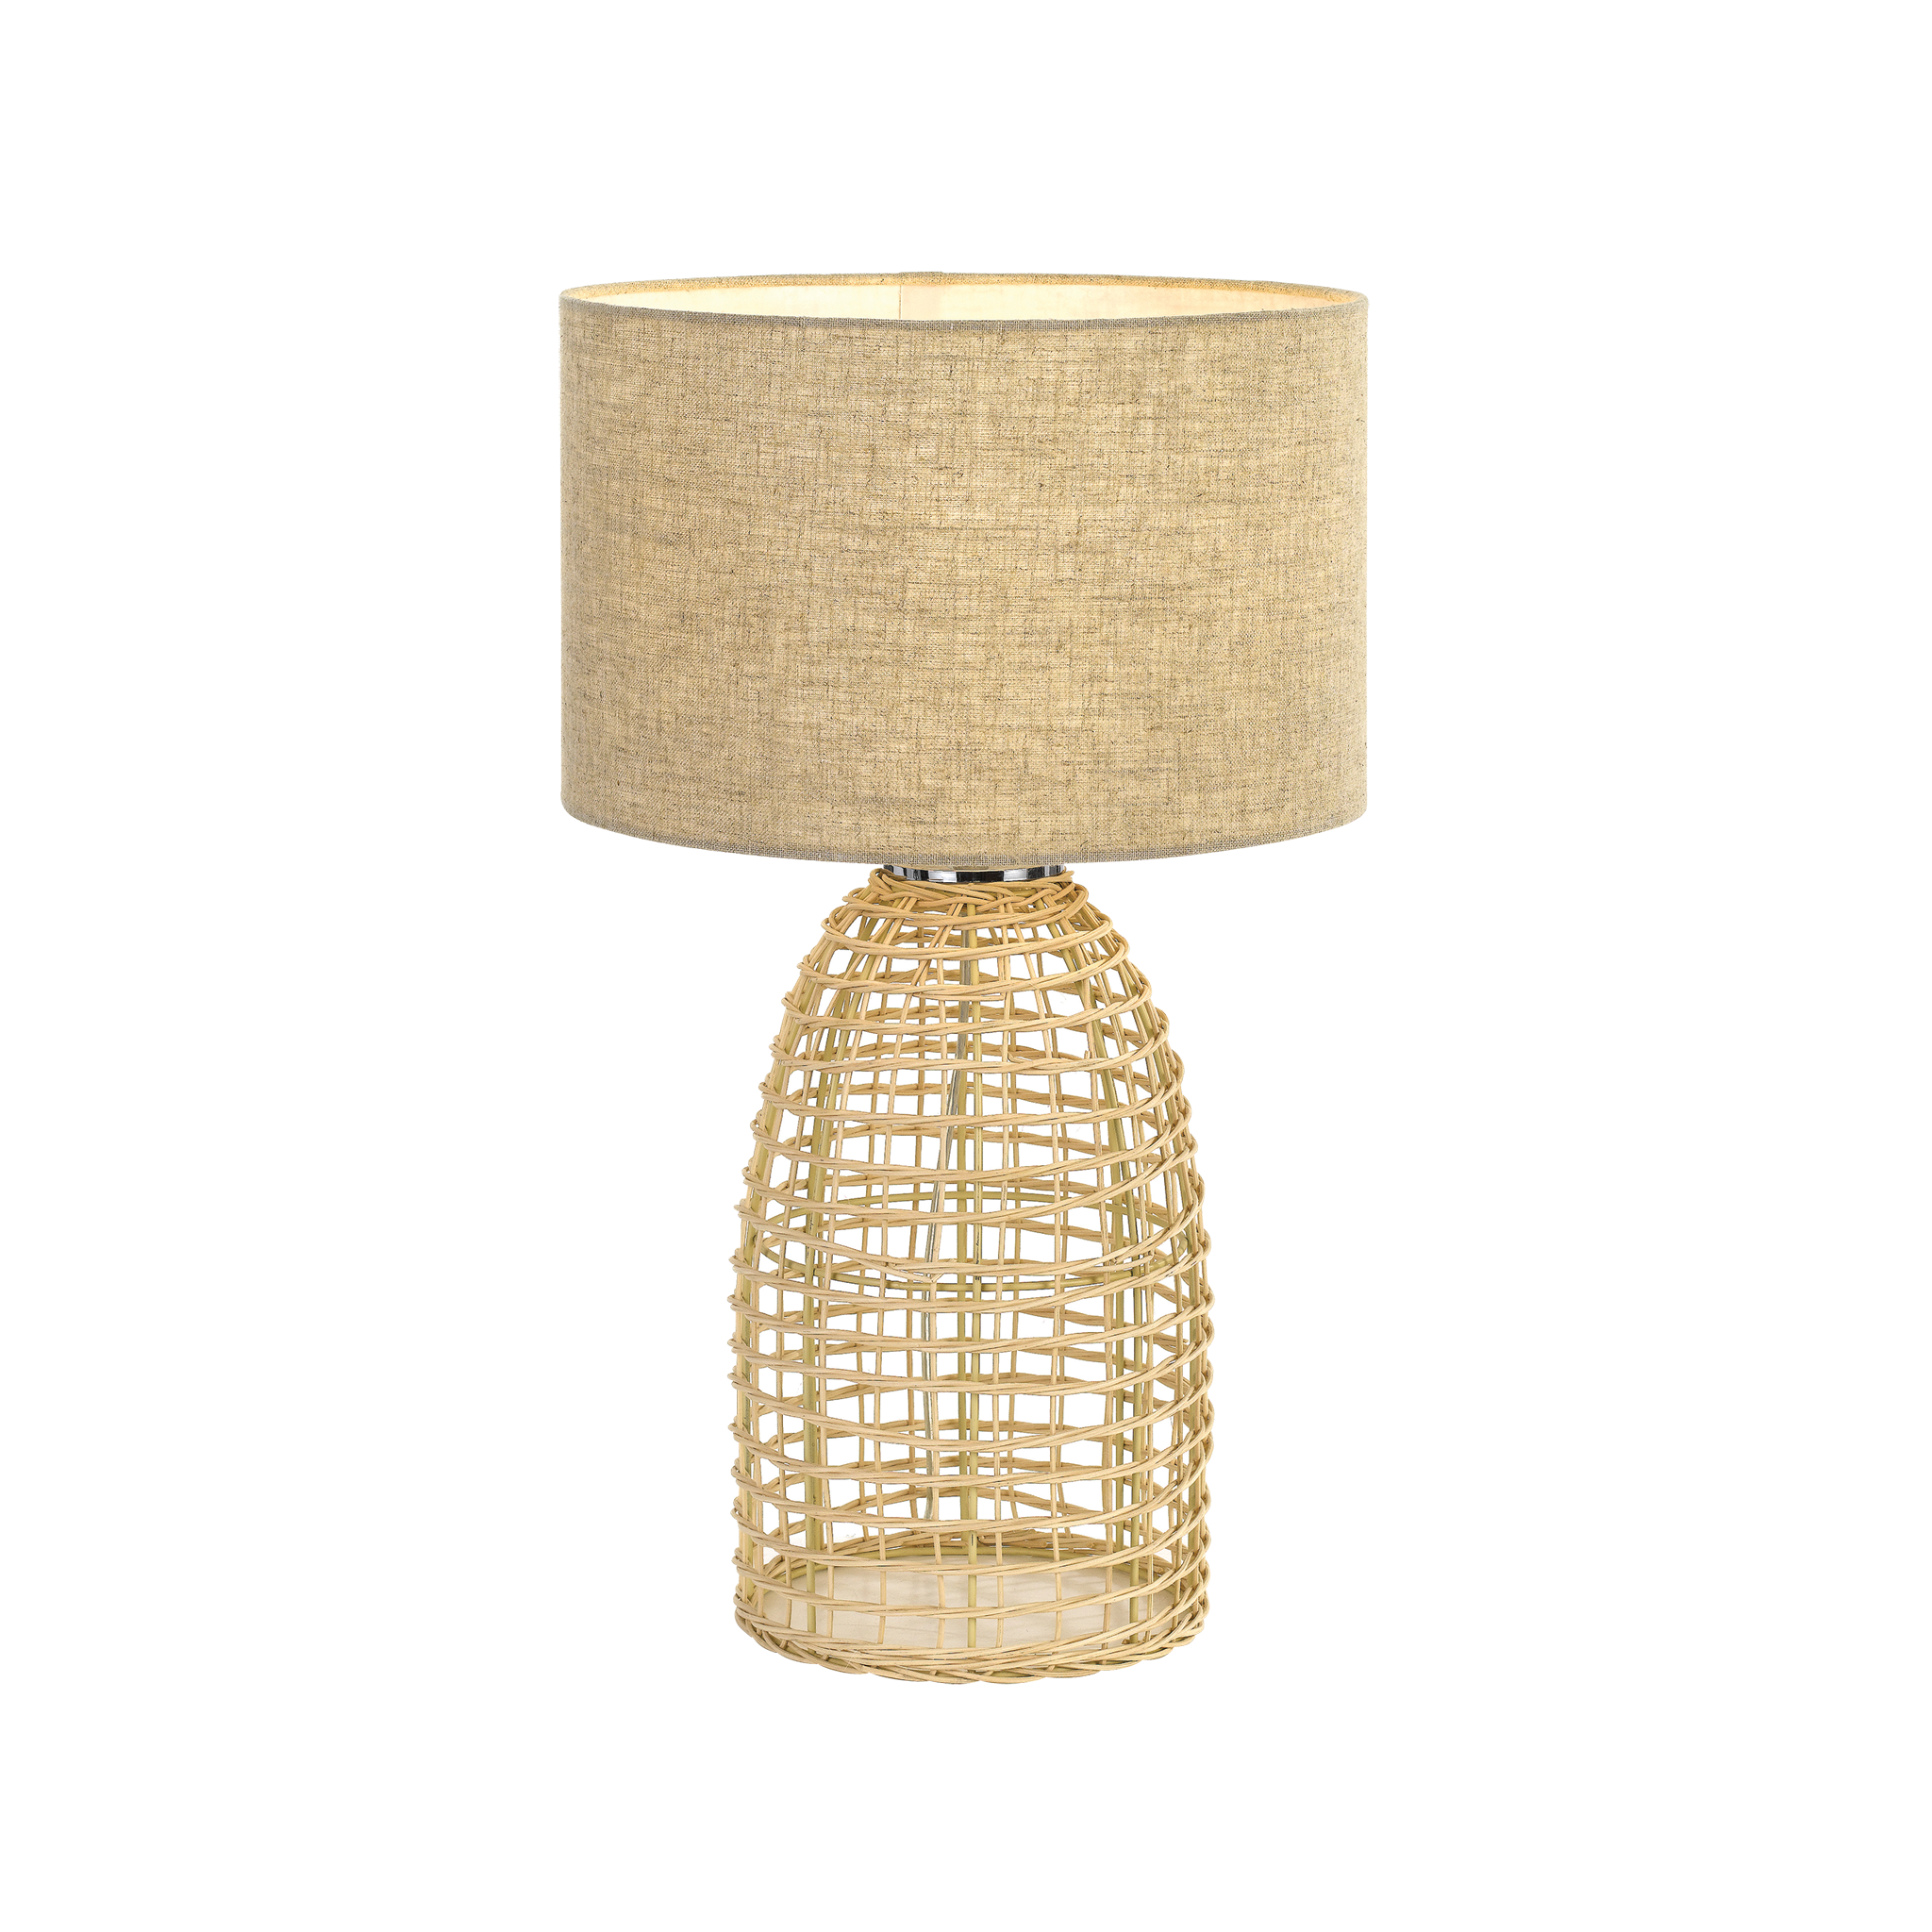 Bayz Small Sand Rattan Bottle Cage Table Lamp